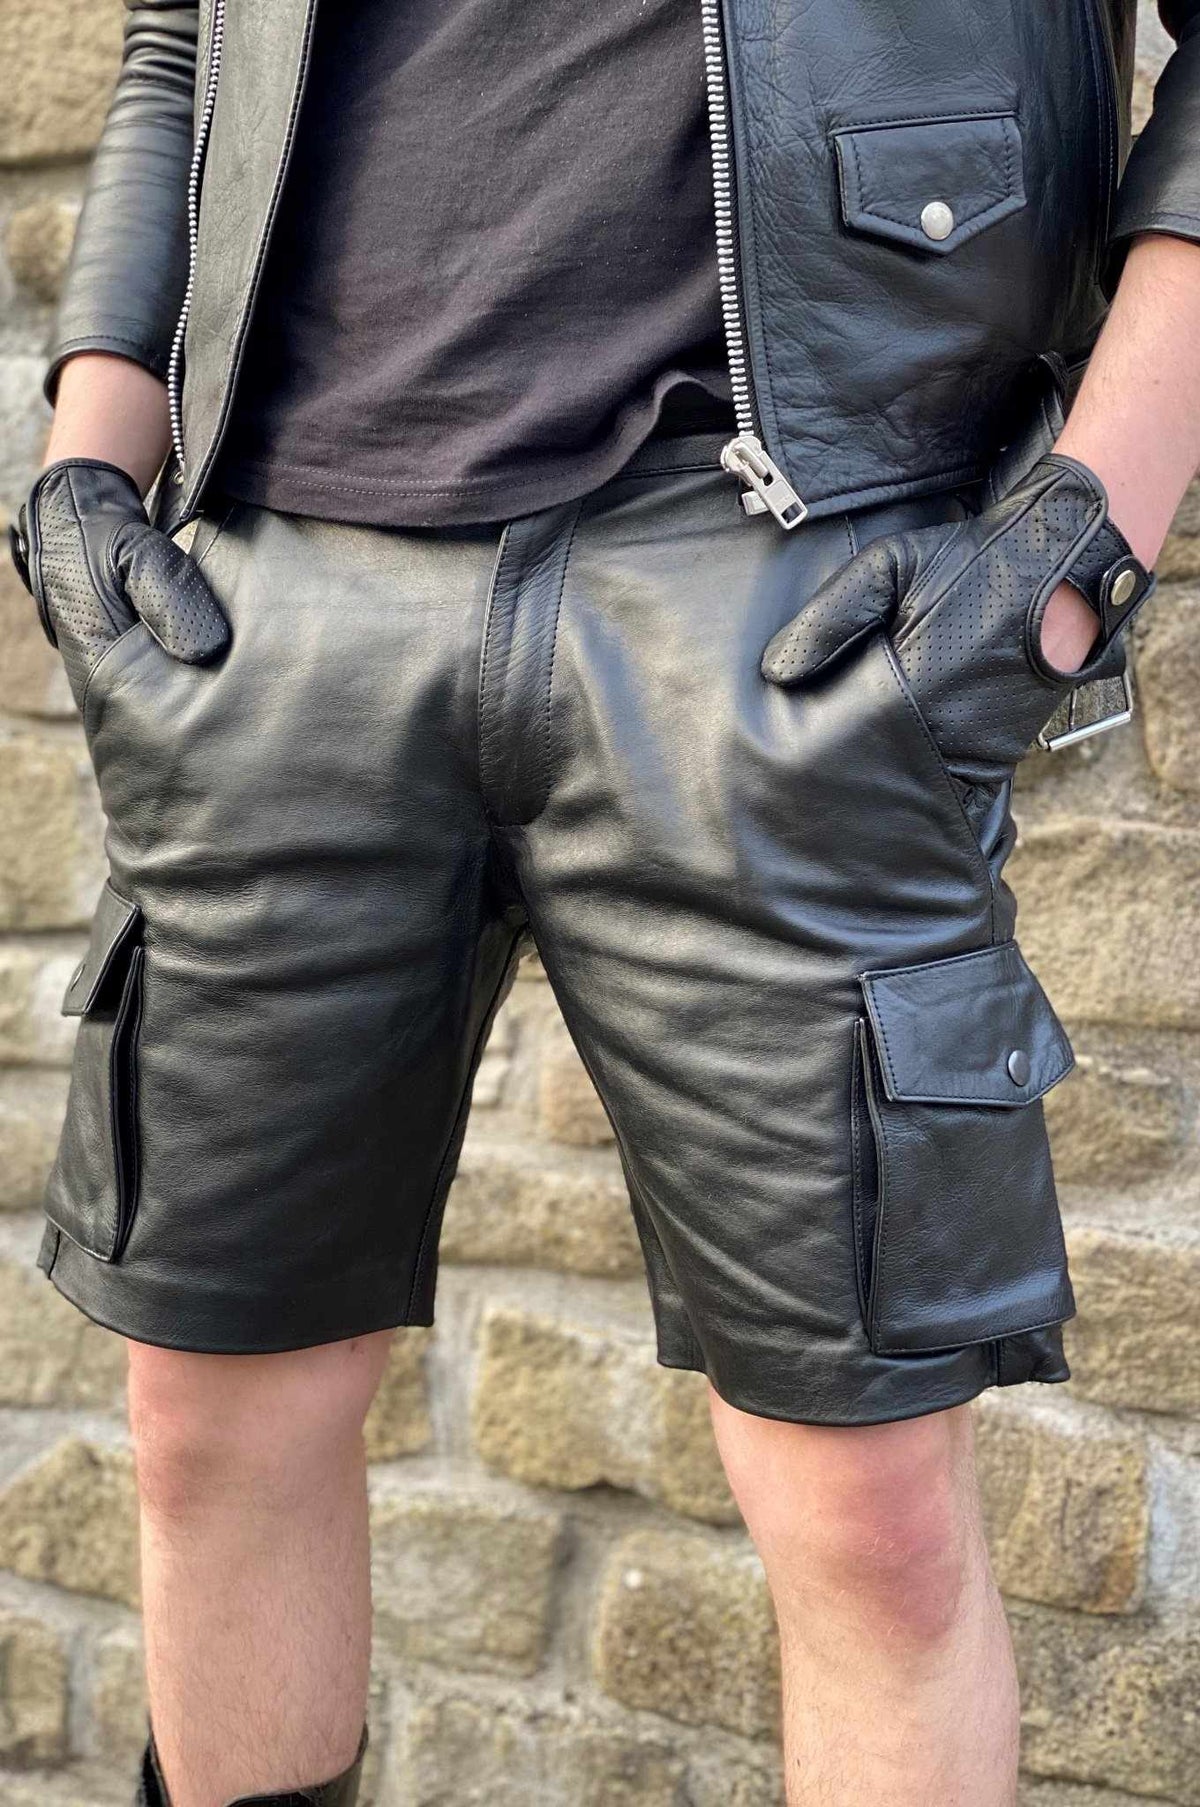 Browse fashionable and sexy gay leather shorts | MR. Riegillio